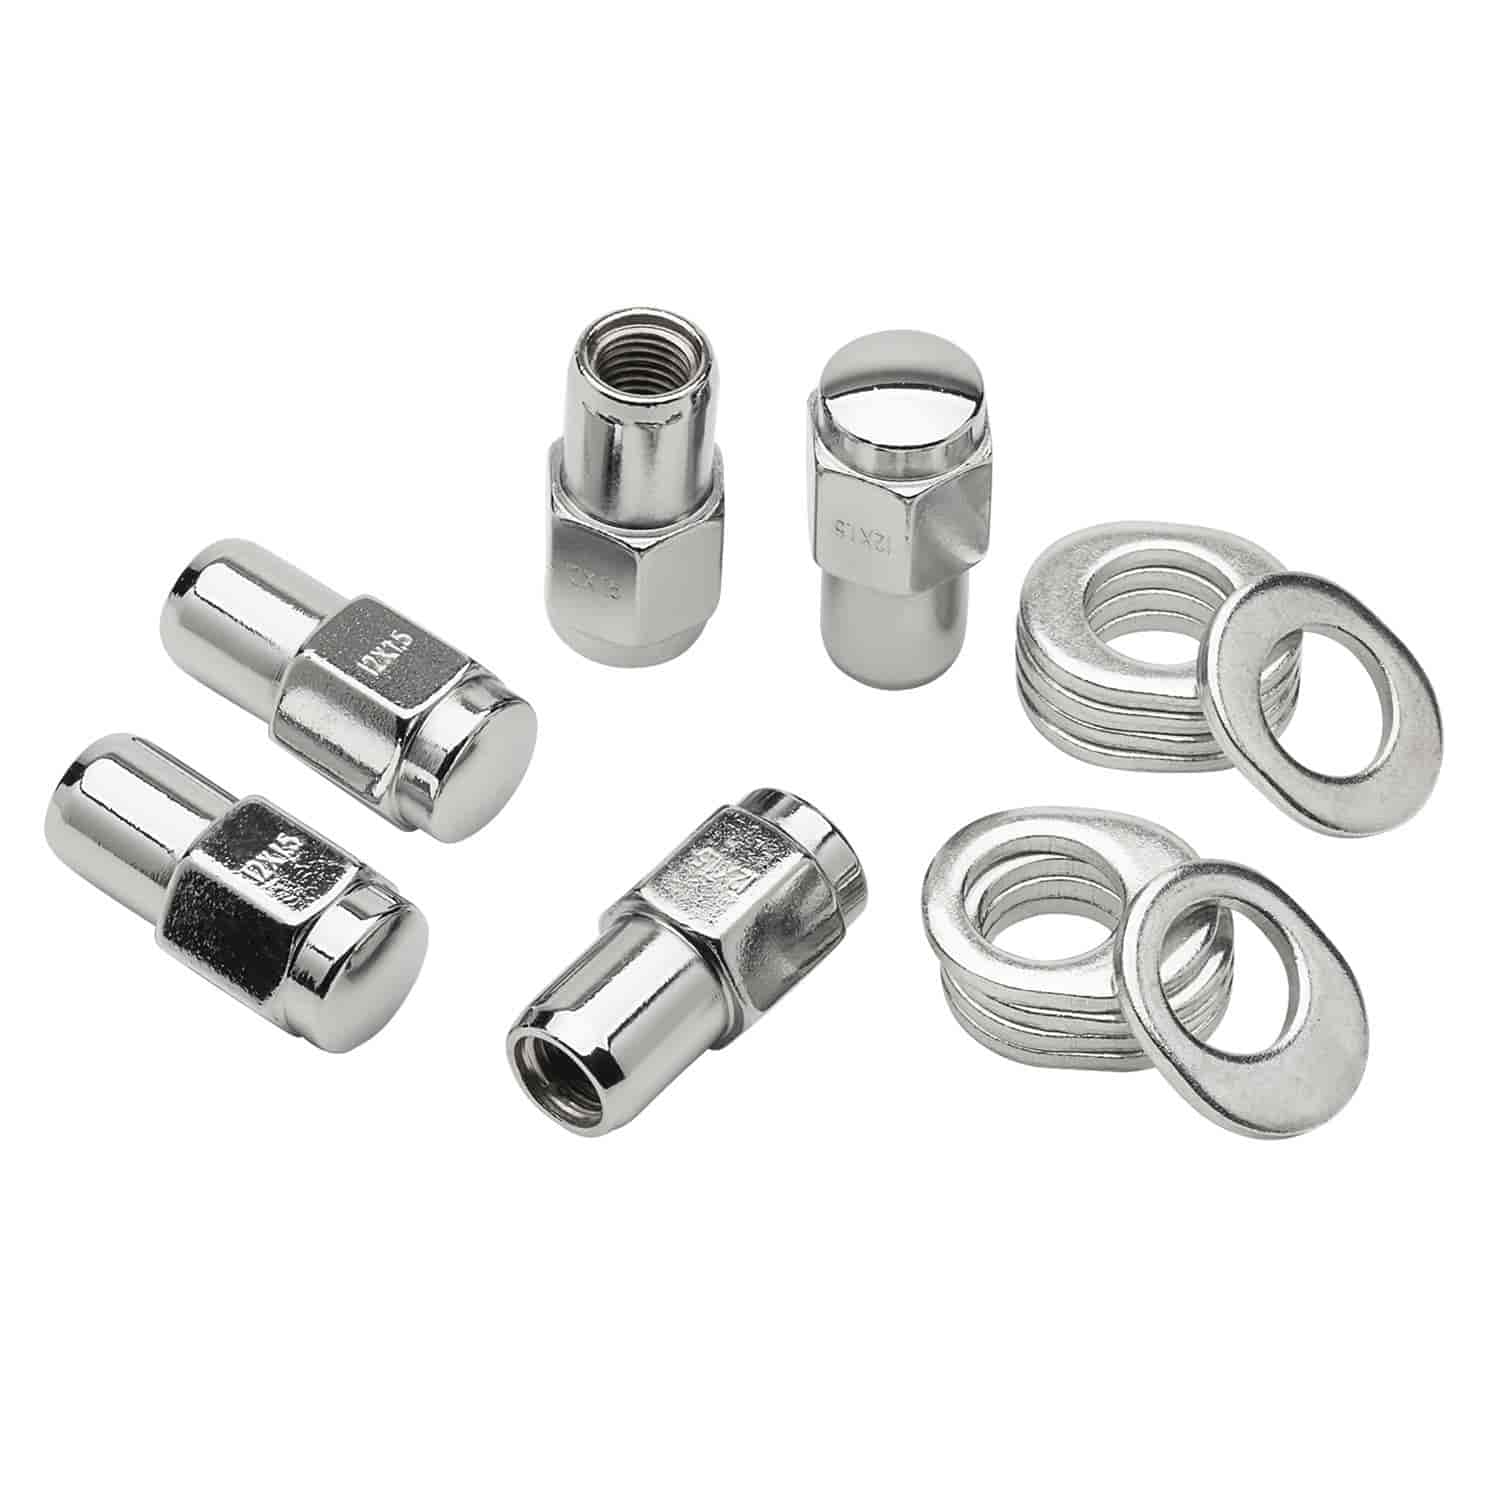 Lug Nuts with Center & Offset Washers 12mm-1.5" RH Thread